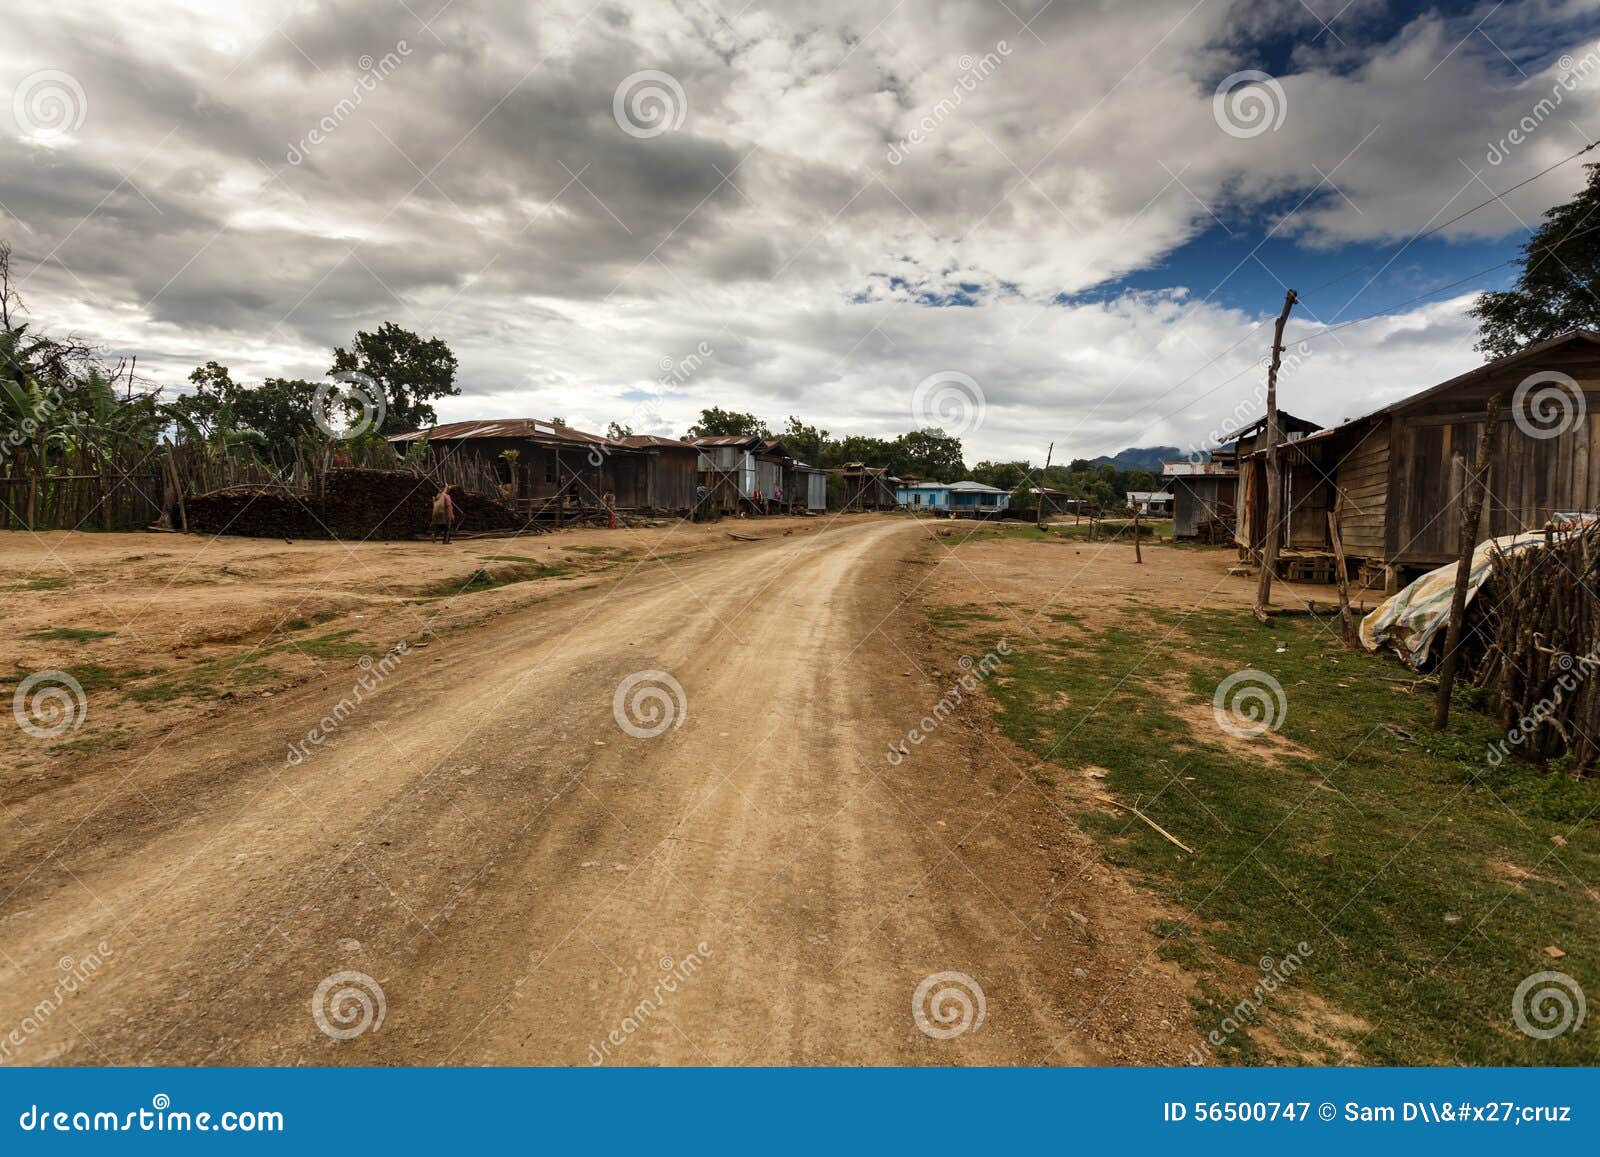 Dirt Road in Chin State, Myanmar Stock Image - Image of rough ...